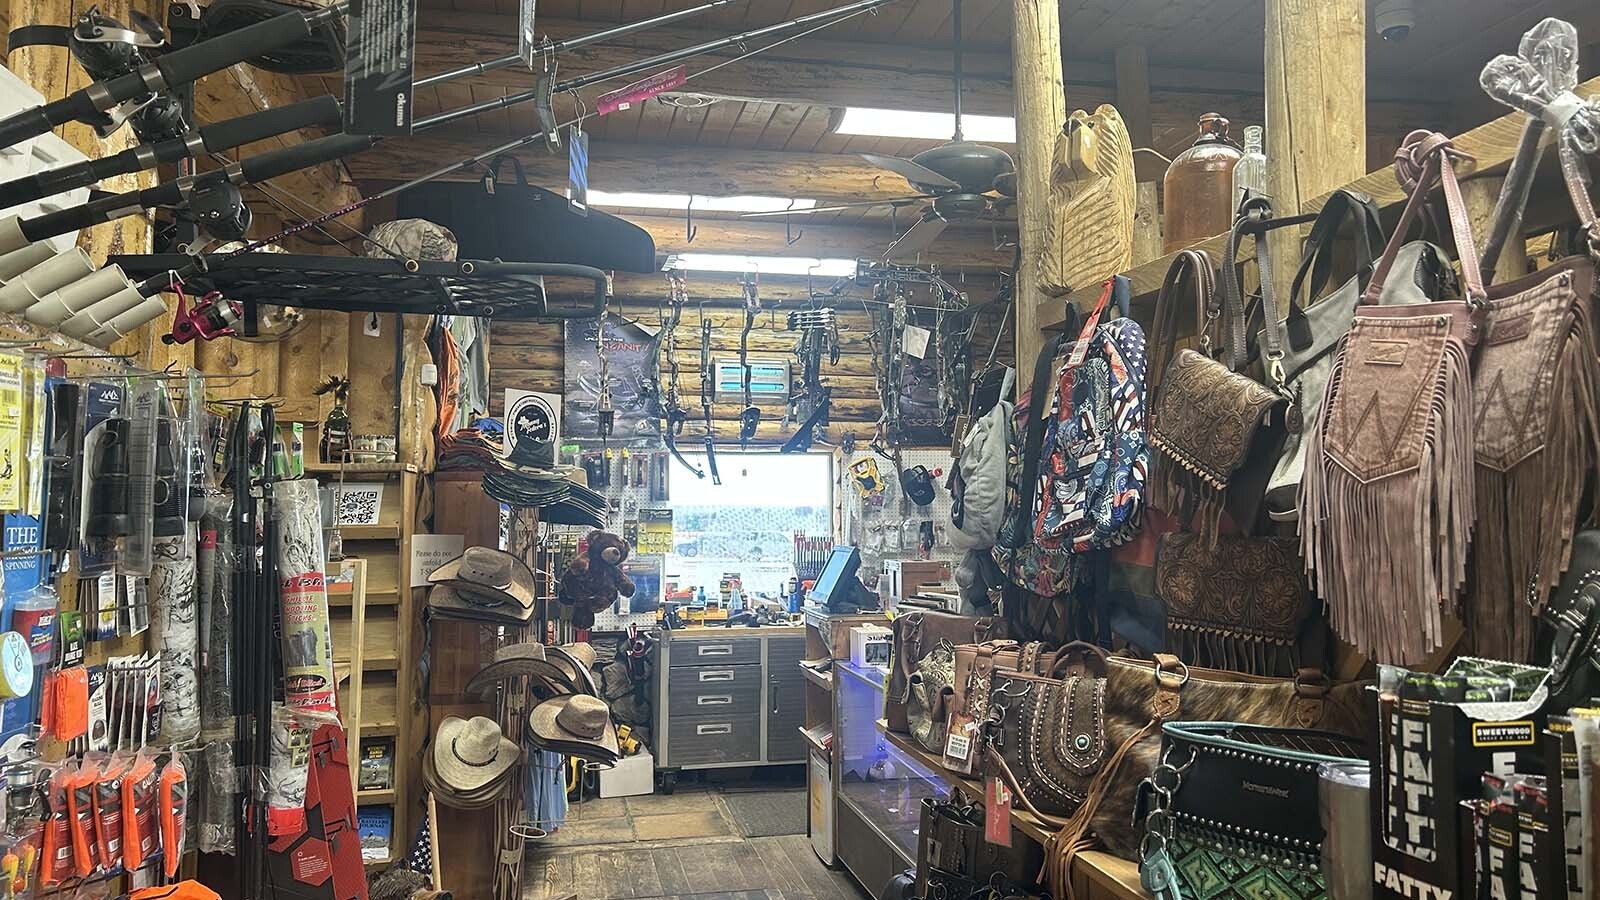 Items for sale in the Daniel Junction Foodmart range from camping, hunting and fishing gear to teddy bears to women’s purses.